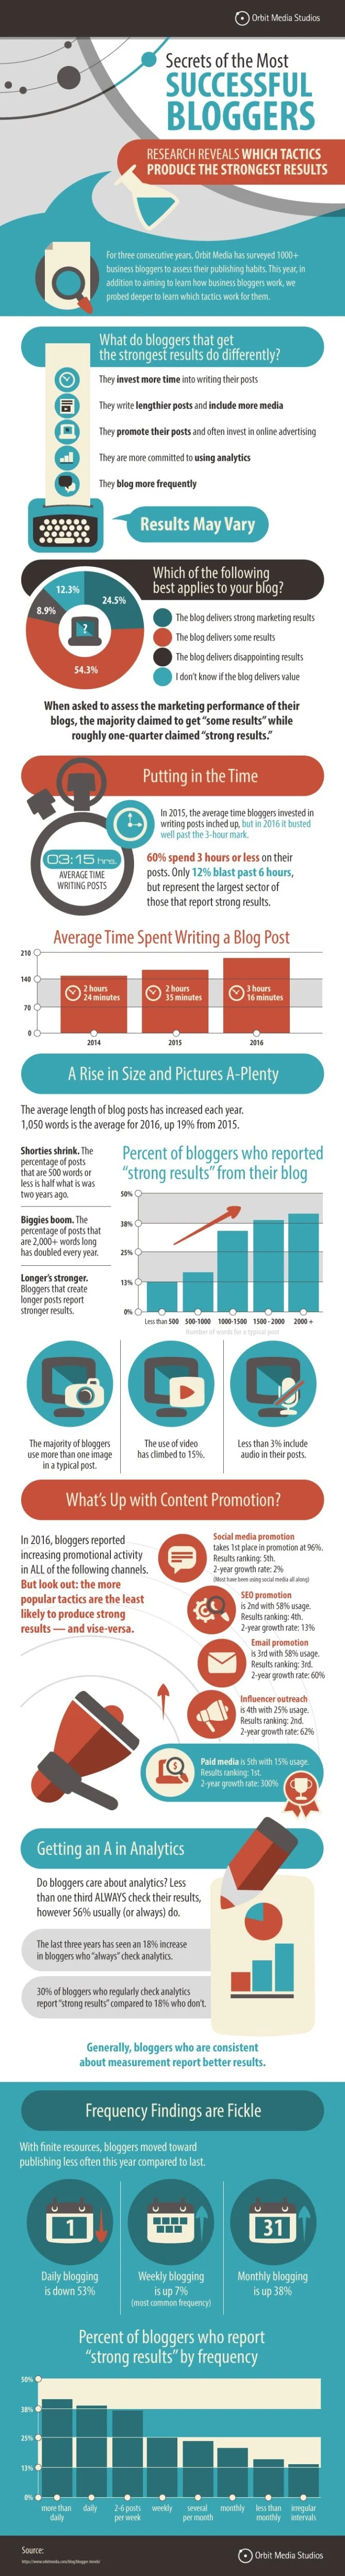 Which Blogging Tactics Produce the Strongest Results? [New Survey Data] #infographic